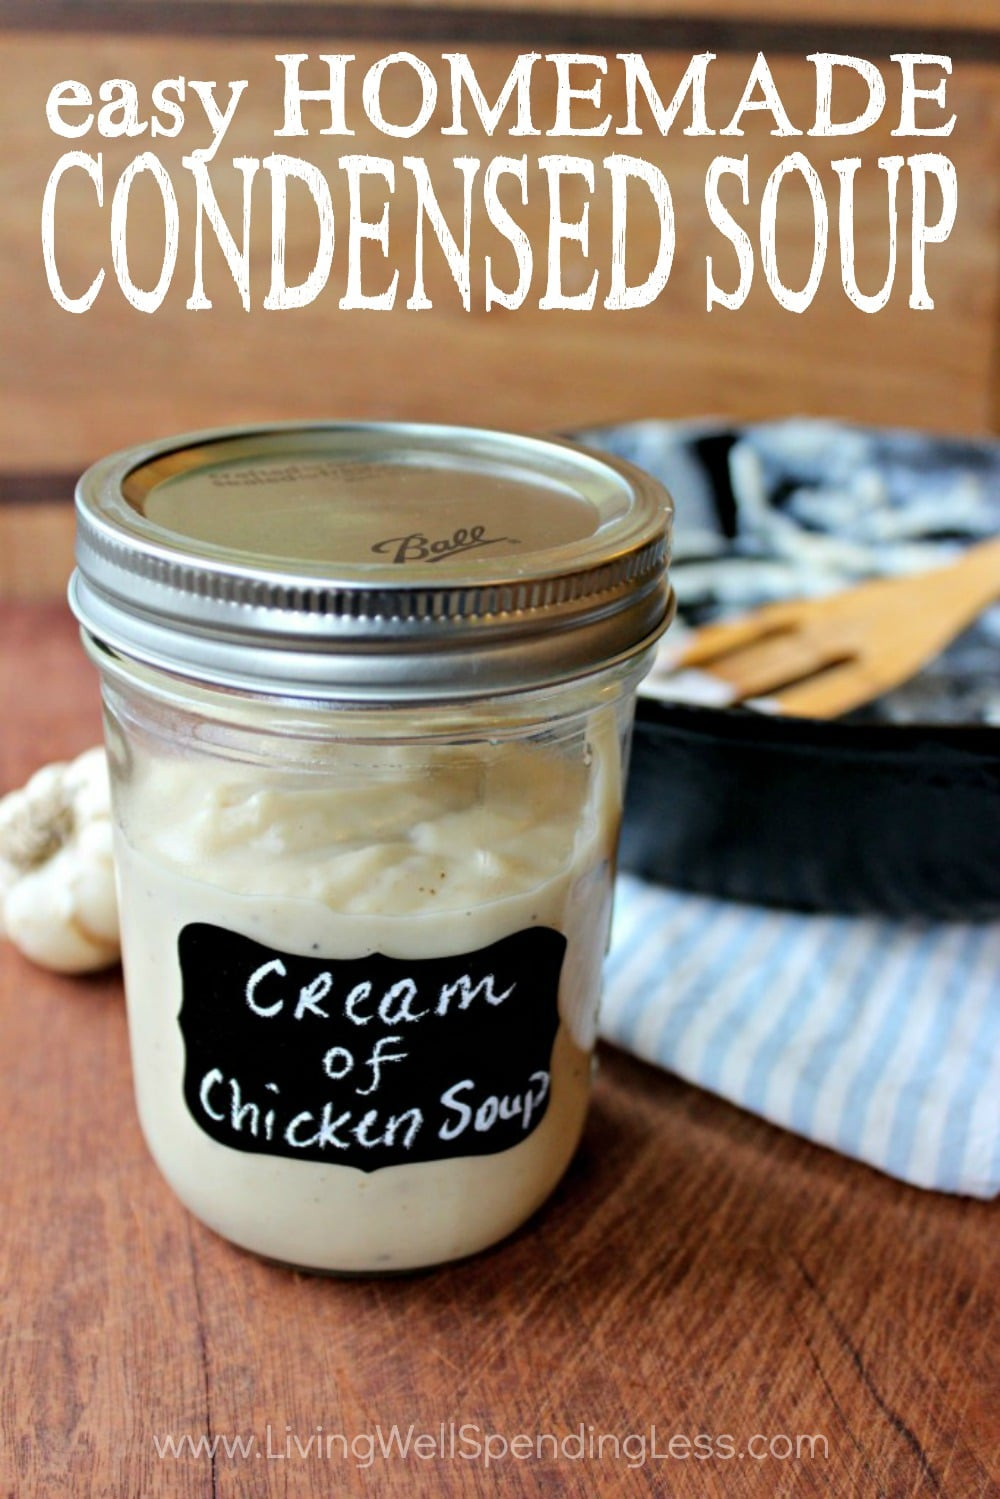 Condensed Cream Of Chicken Soup
 Homemade Condensed Soup Cream of Chicken Soup